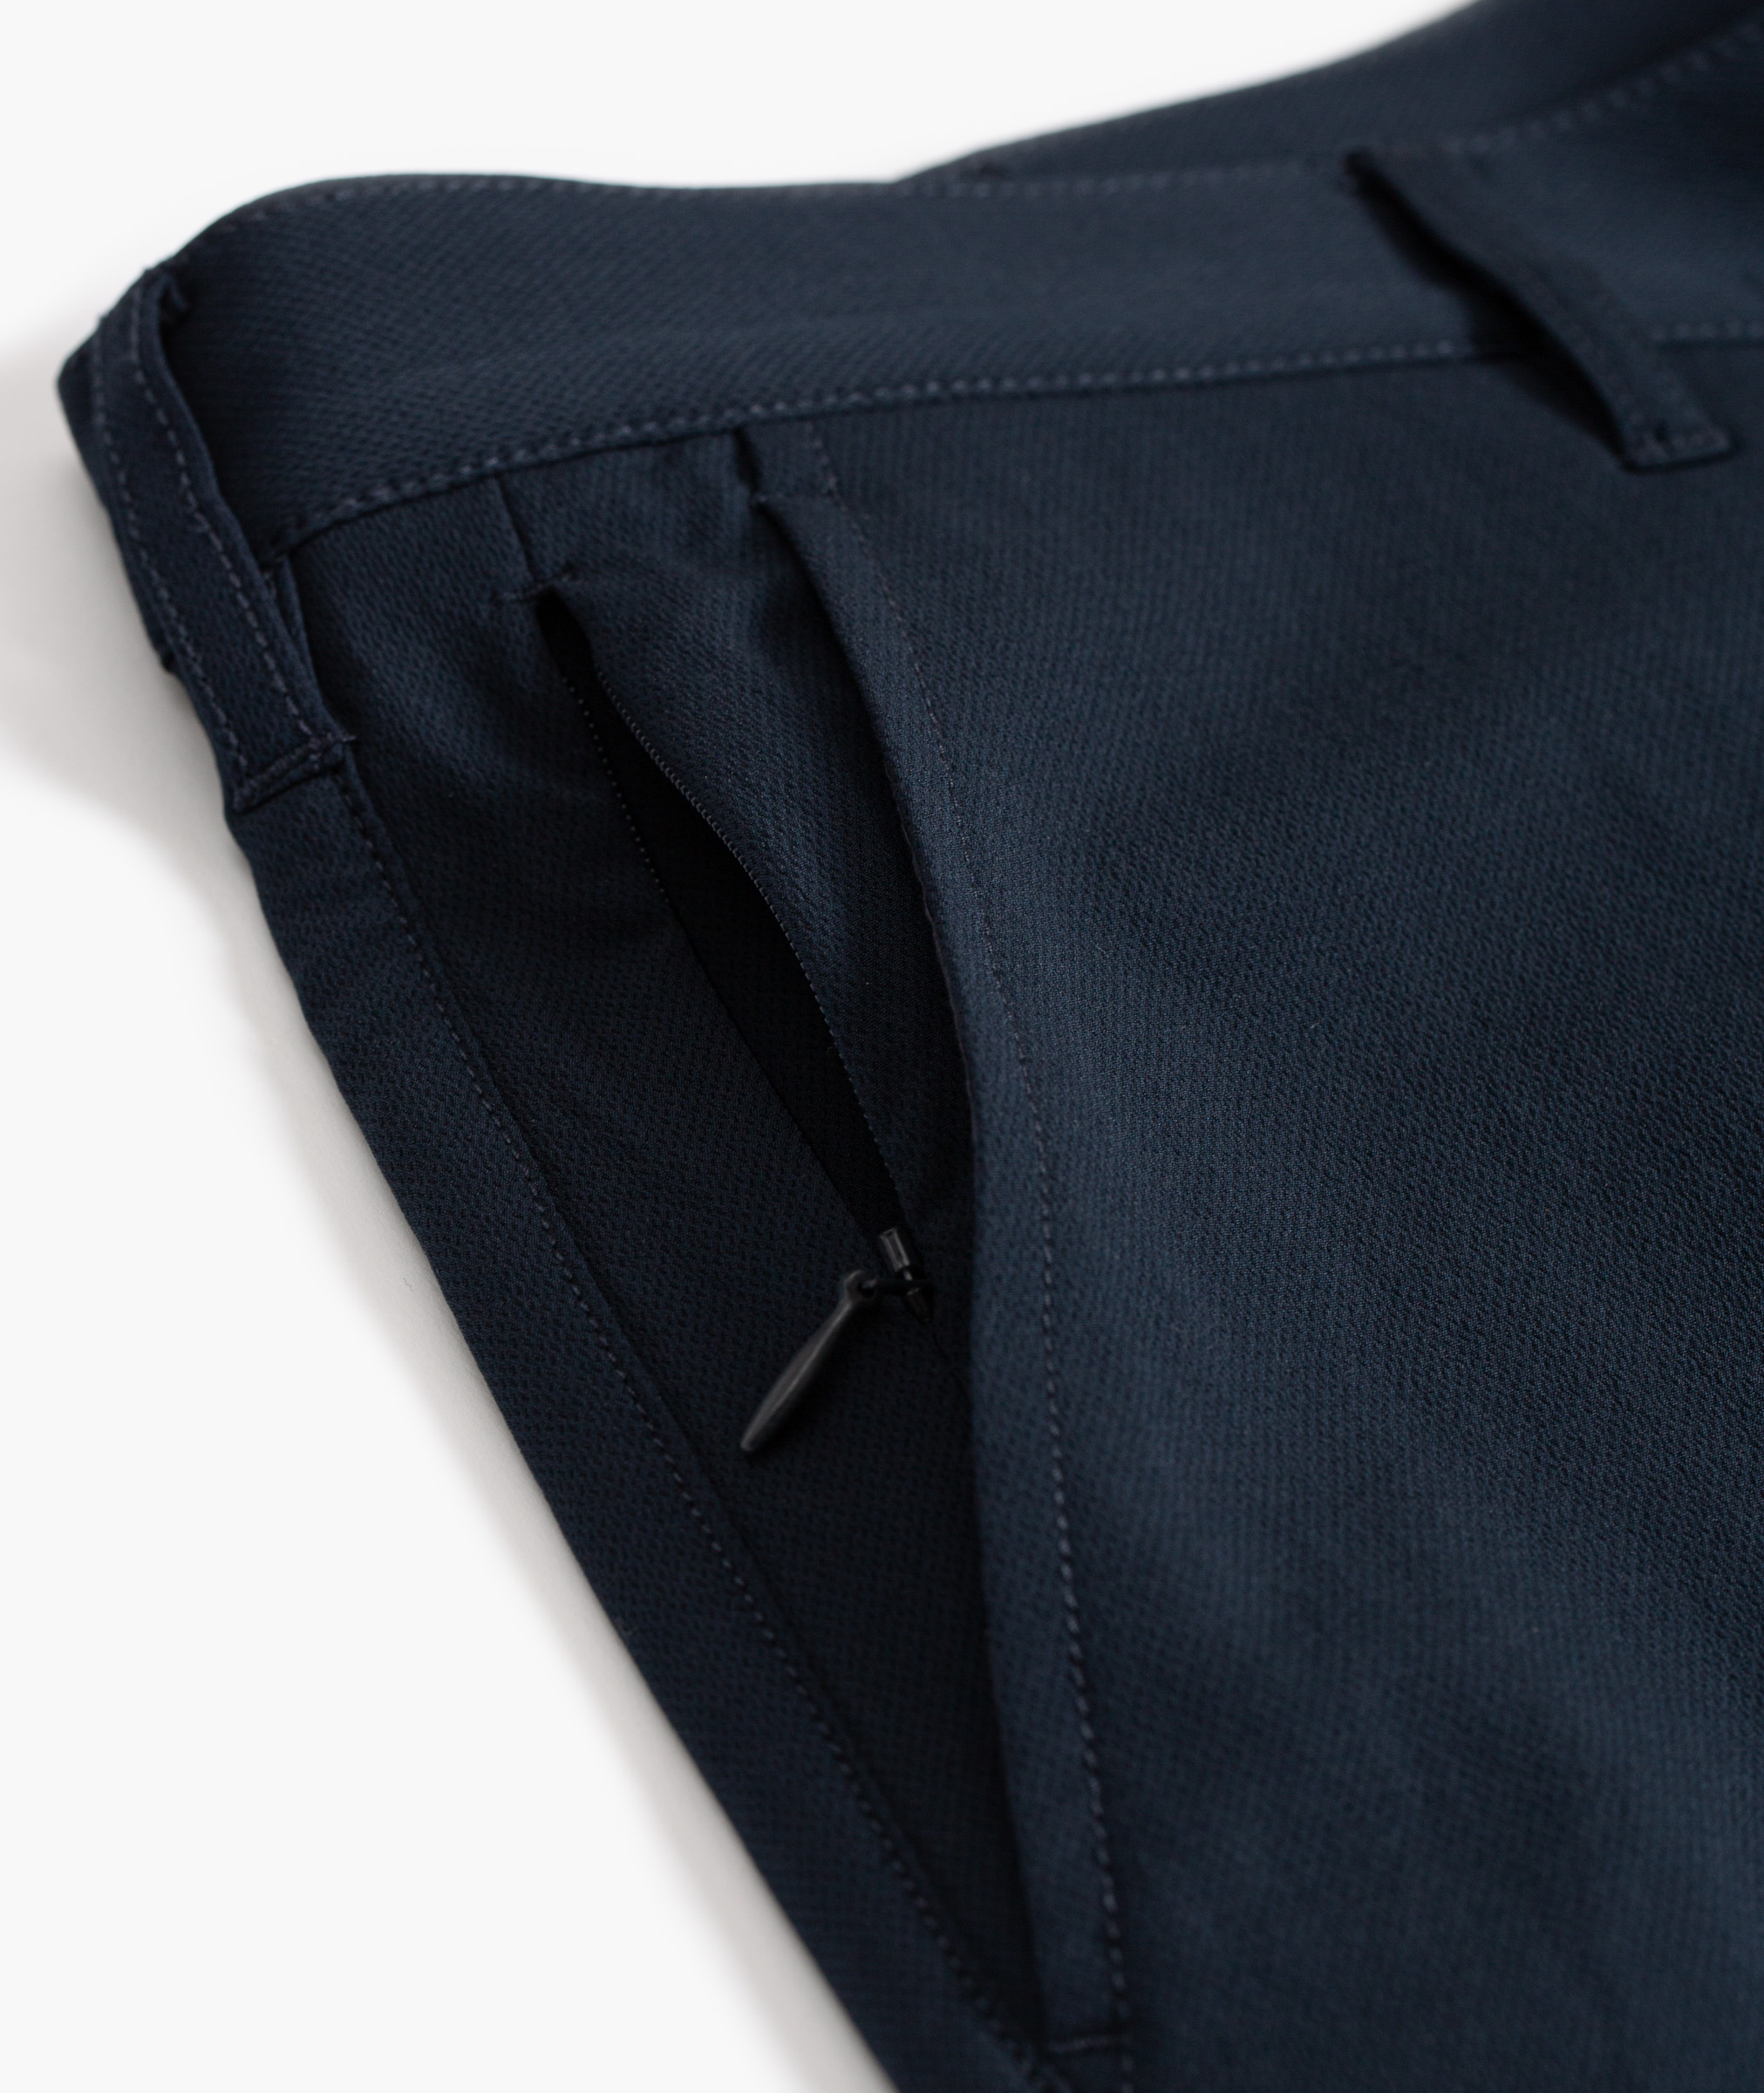 Norse Store | Shipping Worldwide - nanamica Alphadry Club Pants - Navy